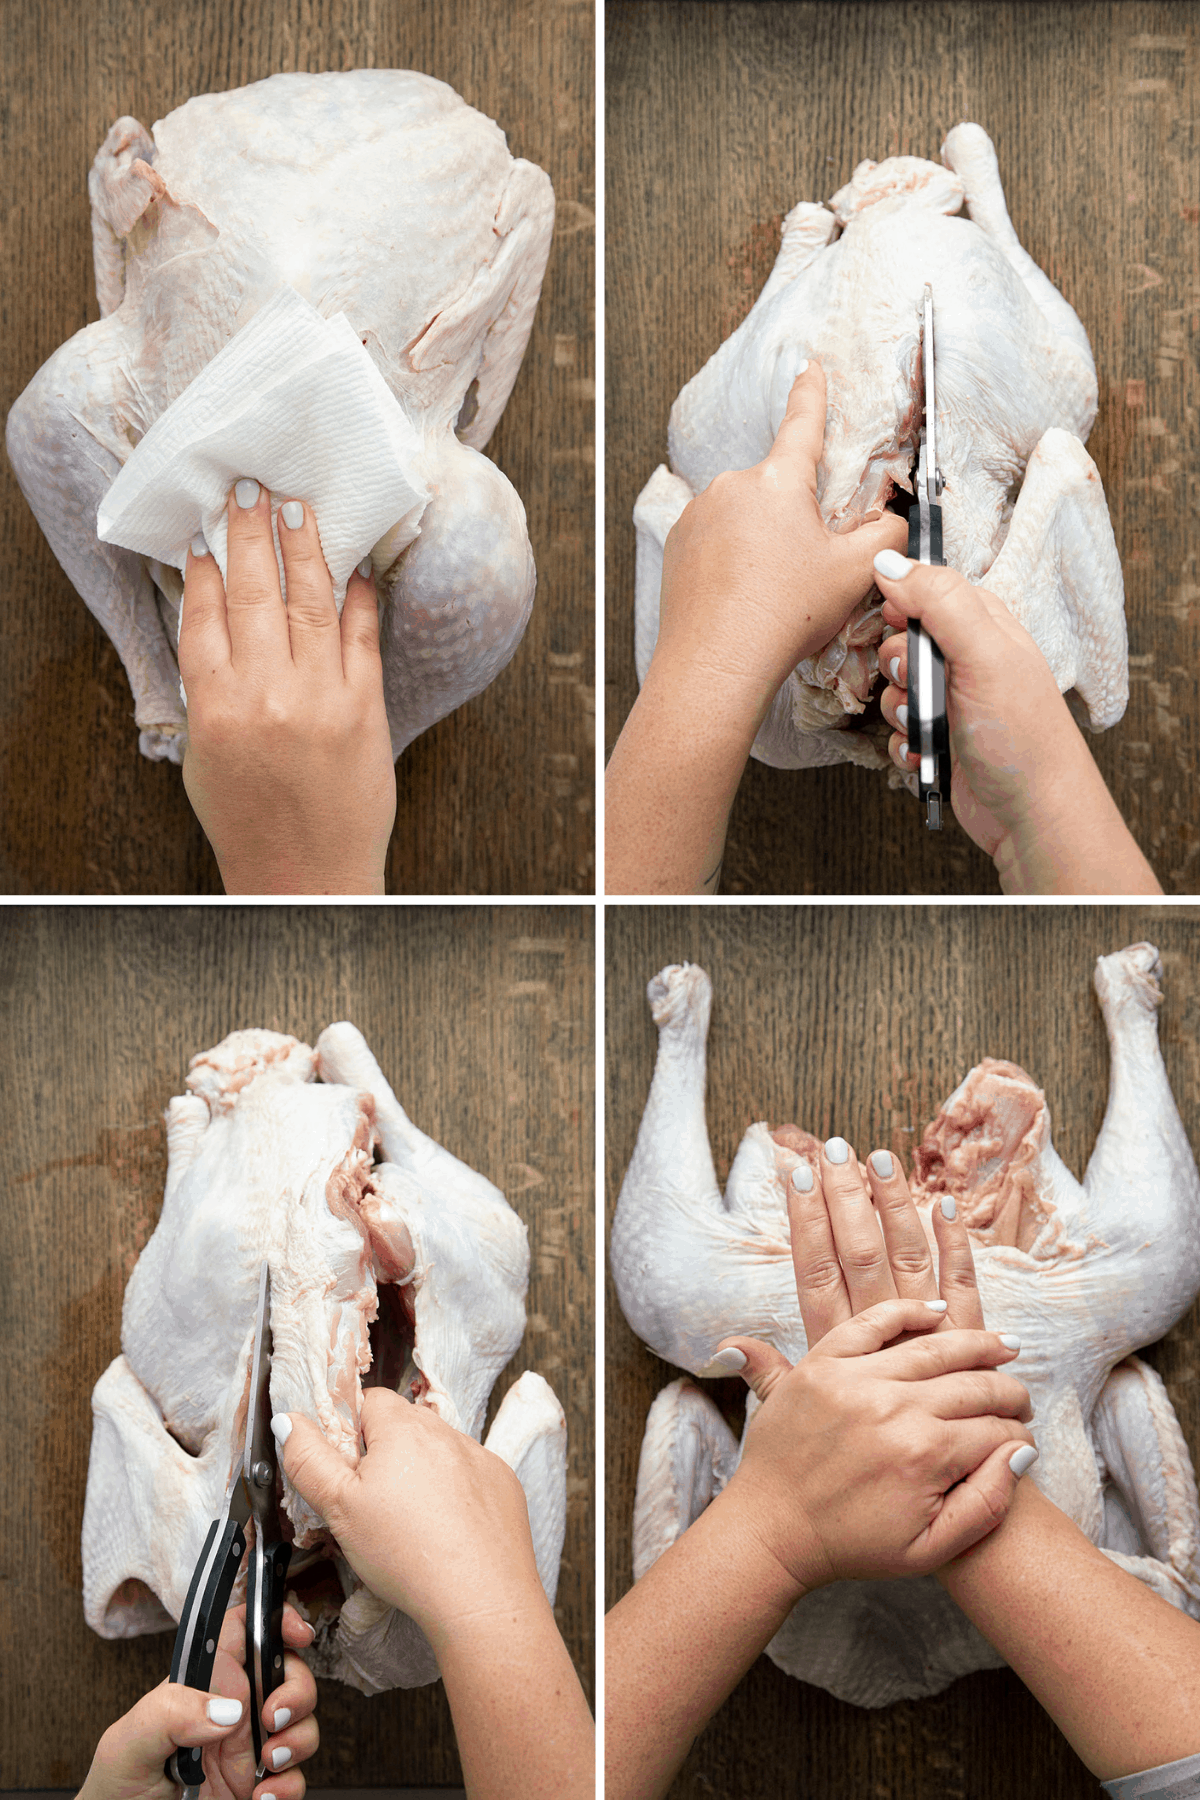 How to Spatchcock a Turkey